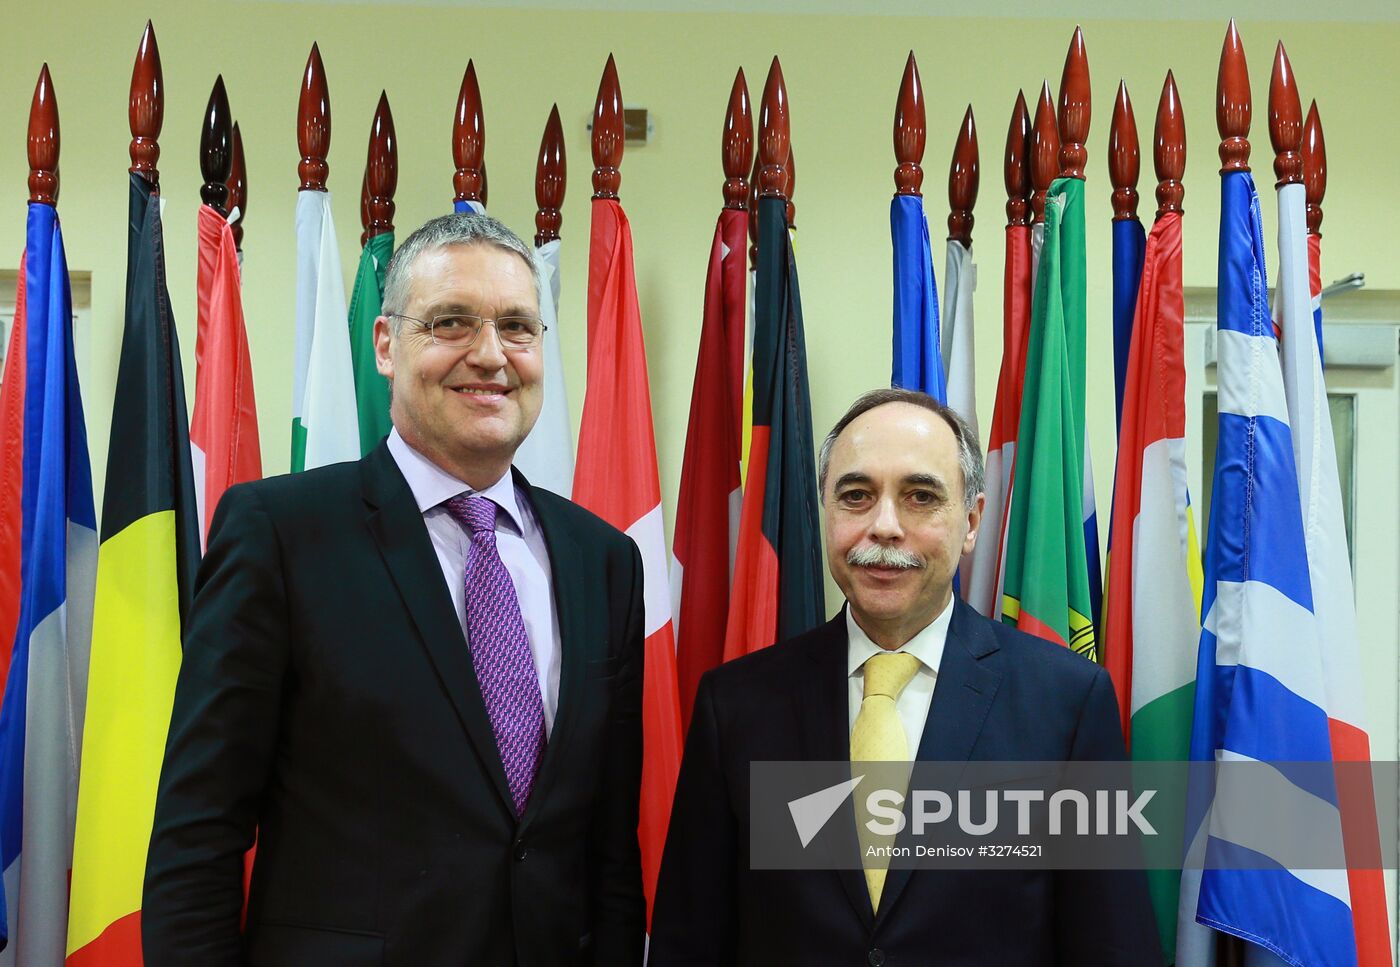 News conference on Bulgaria's initial European Council presidency